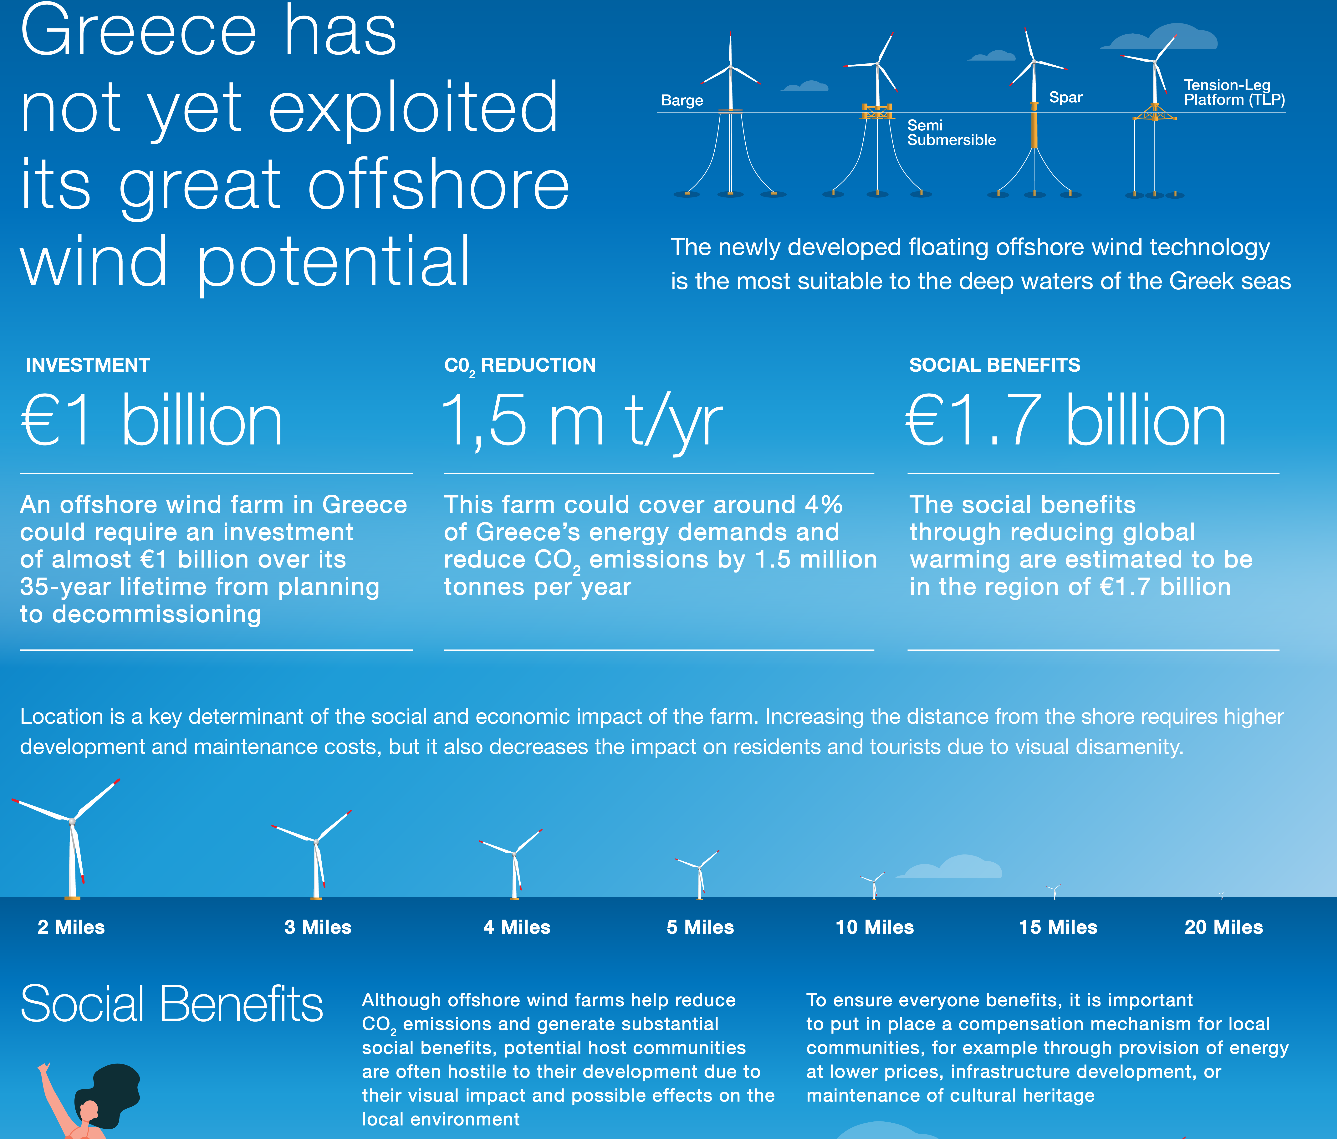 Cost-Benefit Analysis Framework for an Offshore Wind Power Plant in Greece